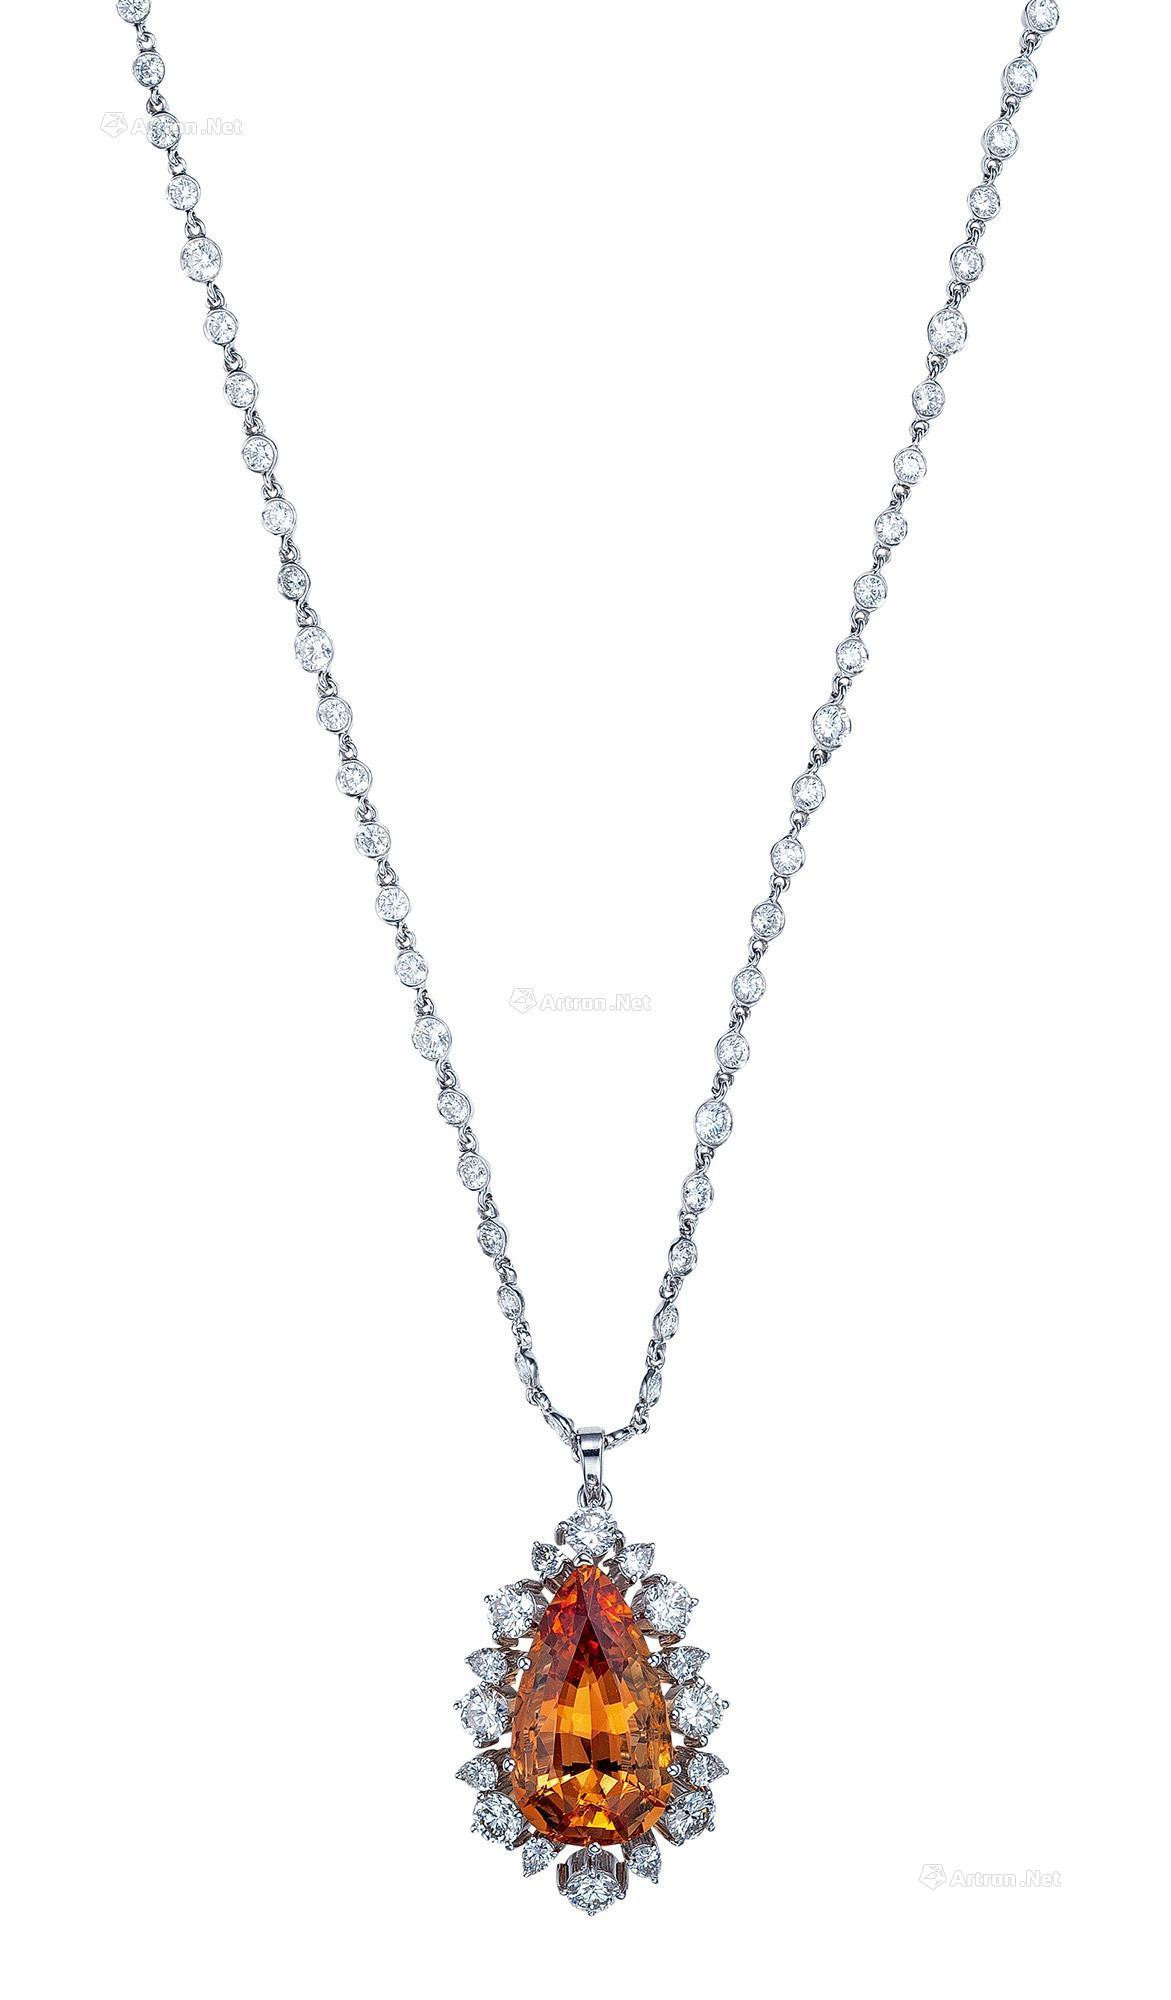 A 19.89 CARAT IMPERIAL TOPAZ AND DIAMOND PENDANT NECKLACE